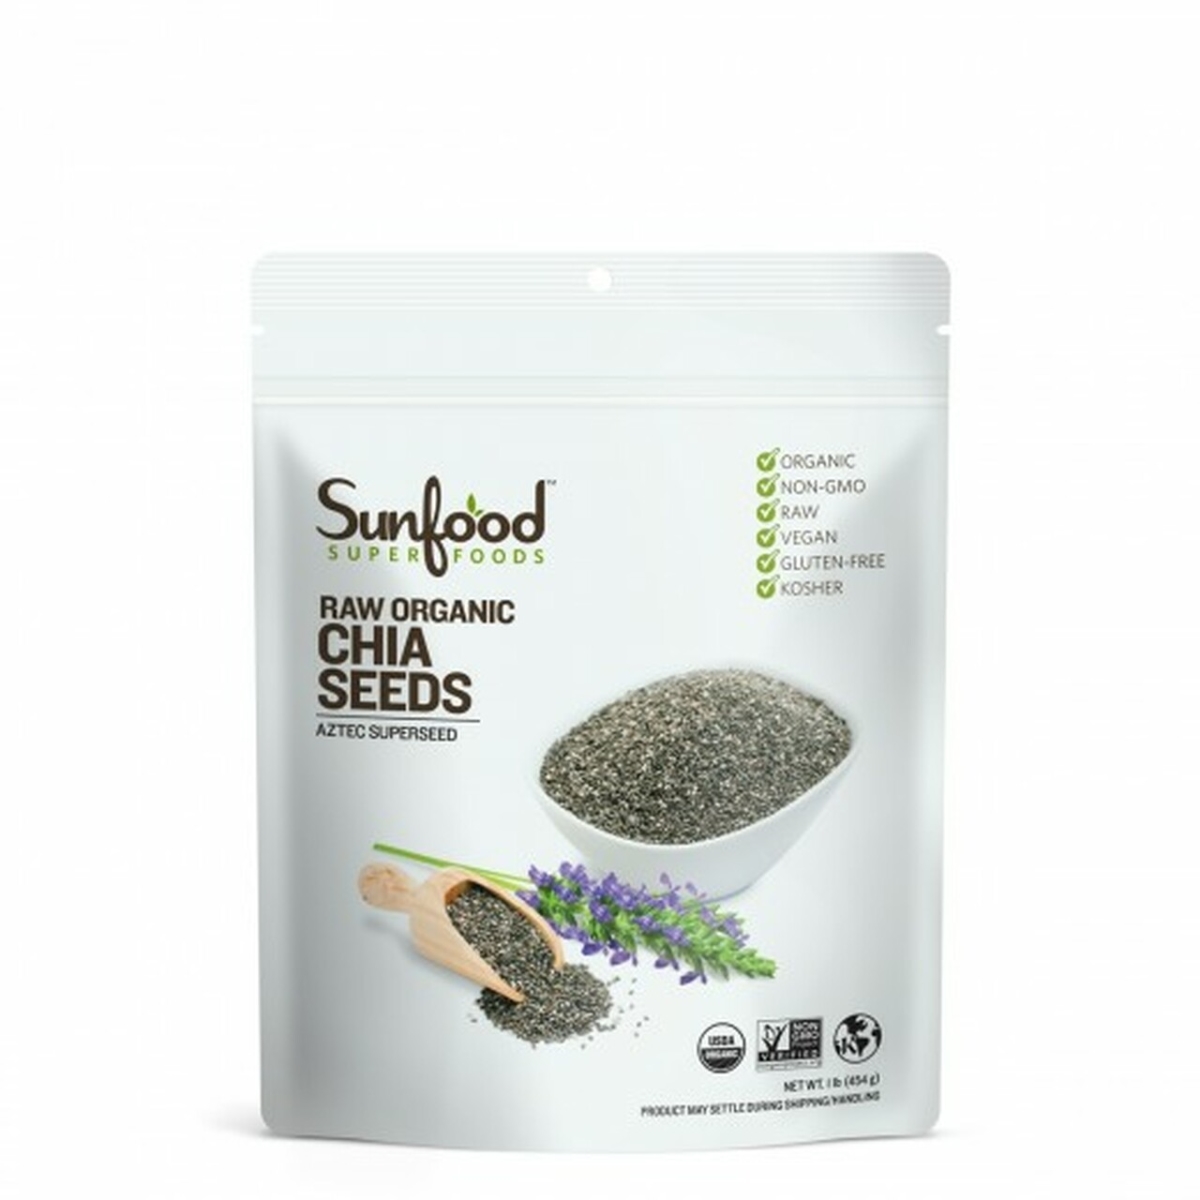 Picture of Sunfood Superfoods HG2328144 Raw Organic Chia Seeds, 1 lbs